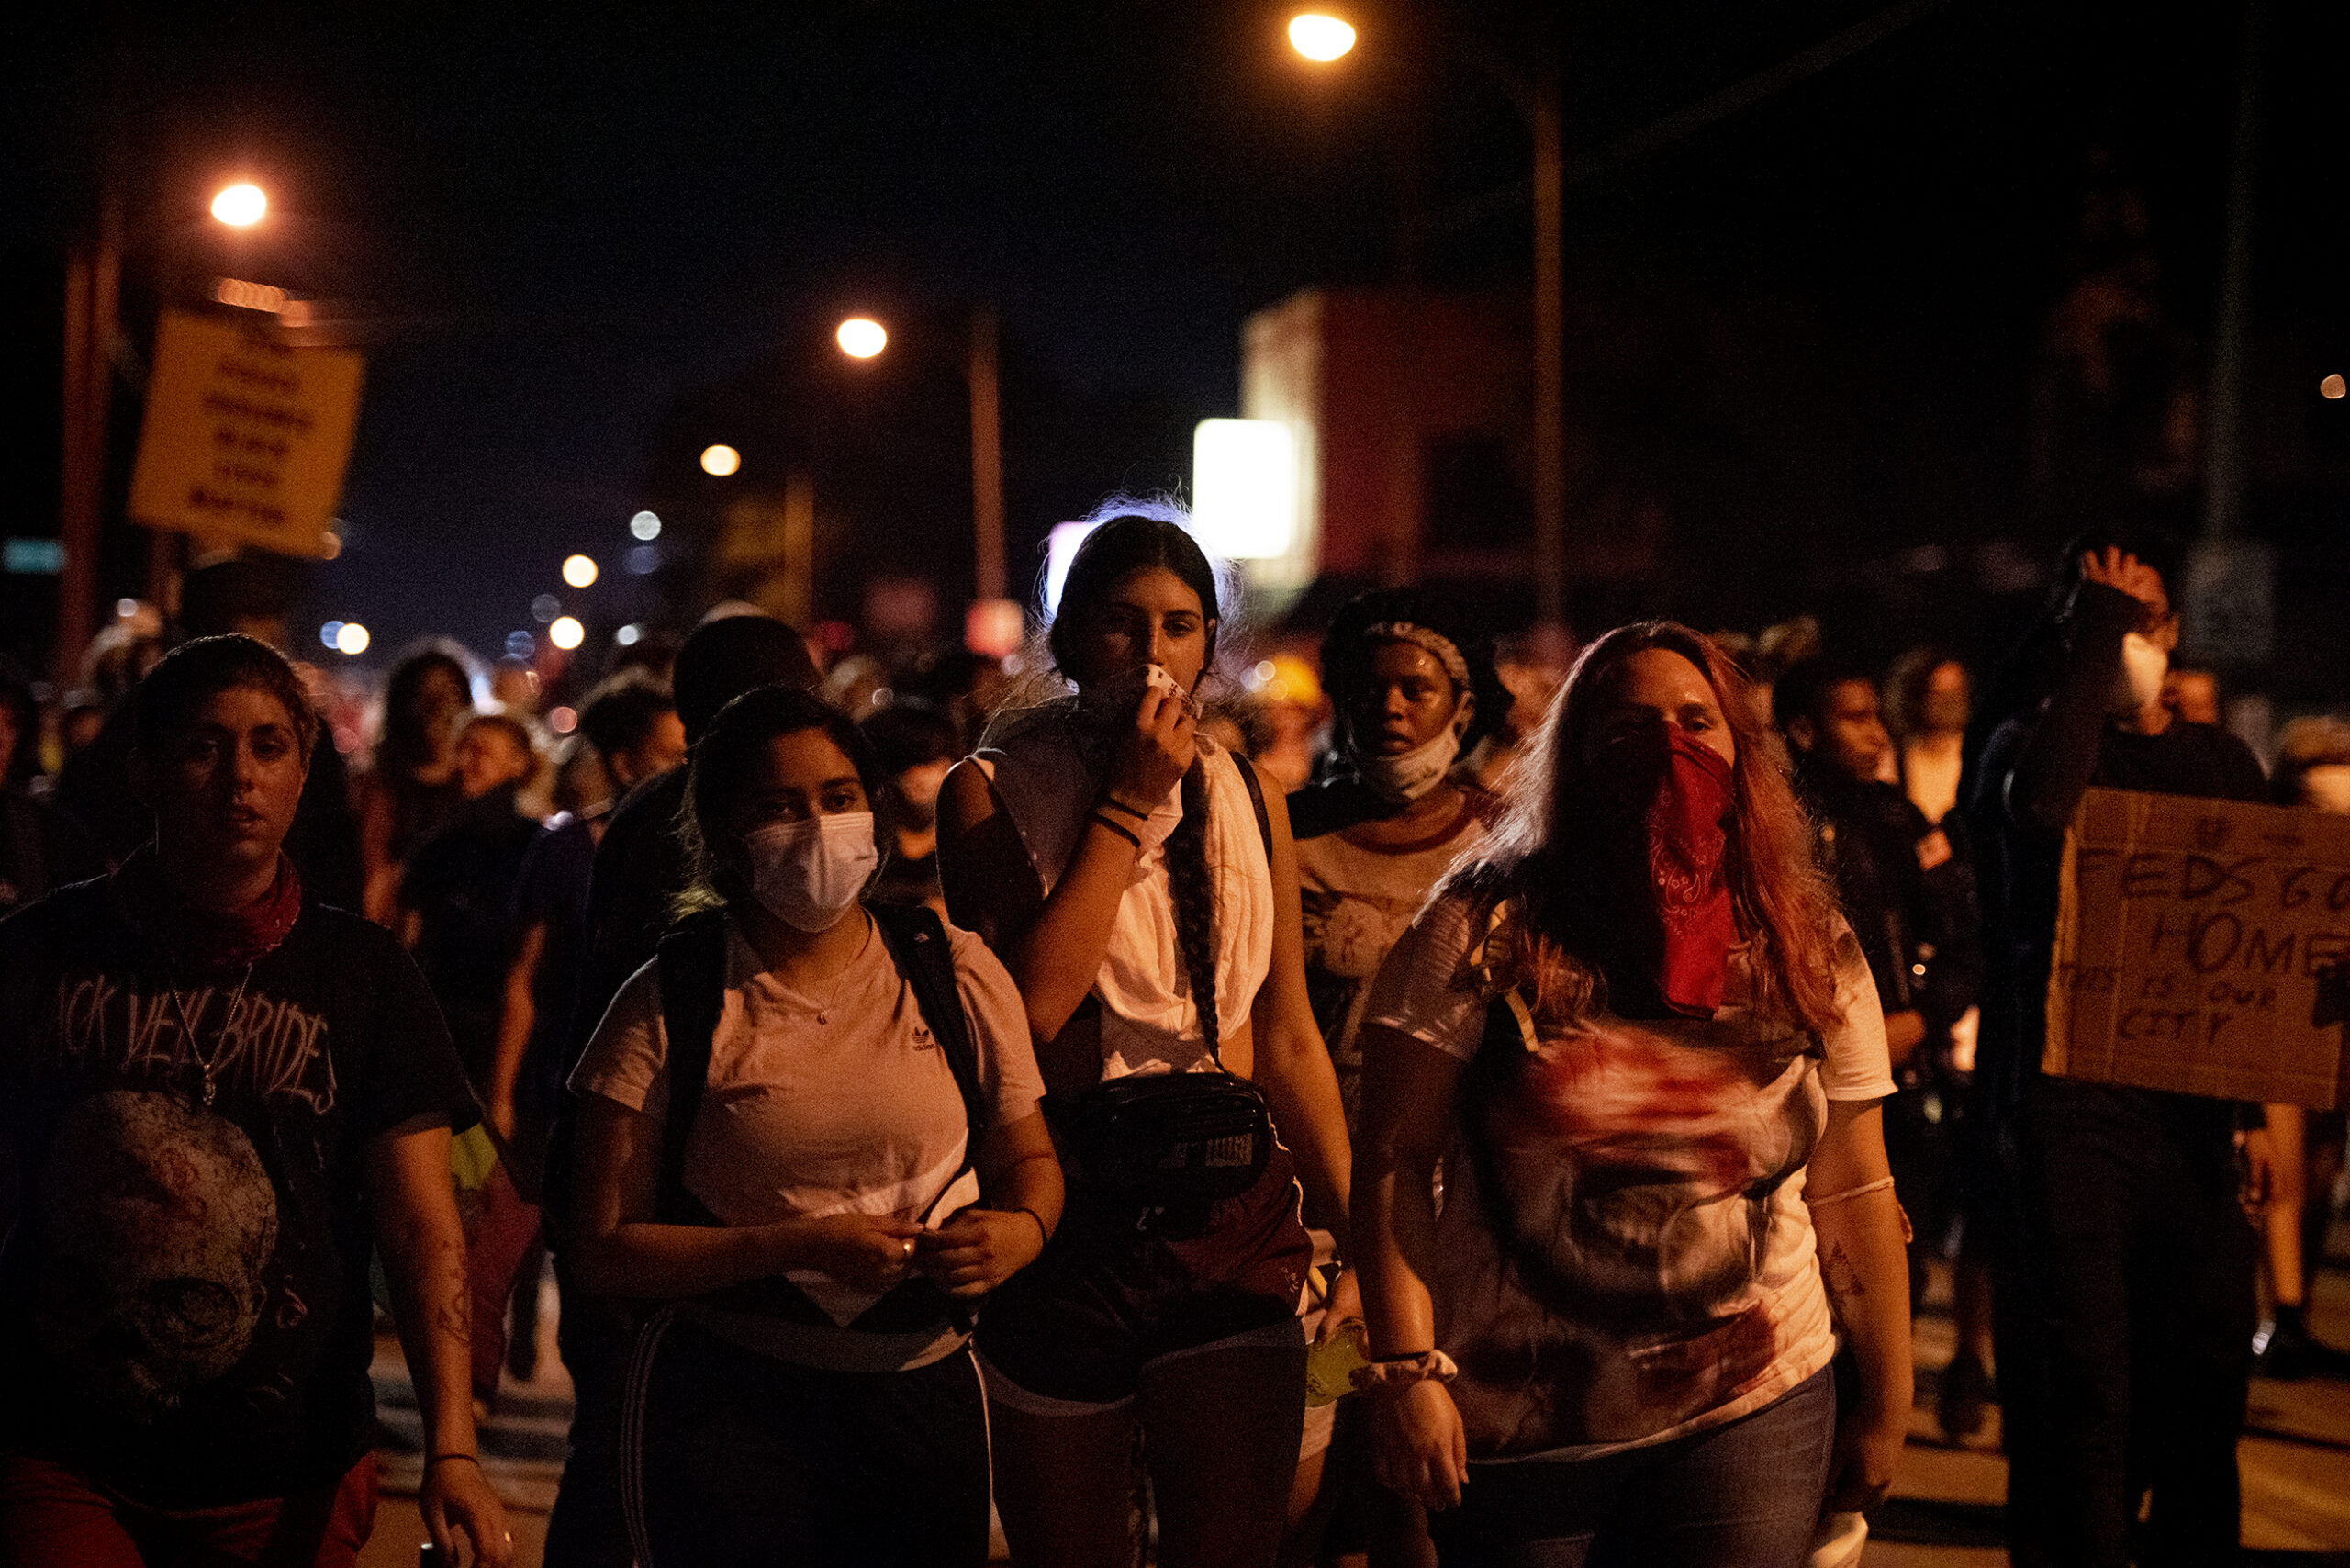 protesters march on a dark street illuminated by street lights